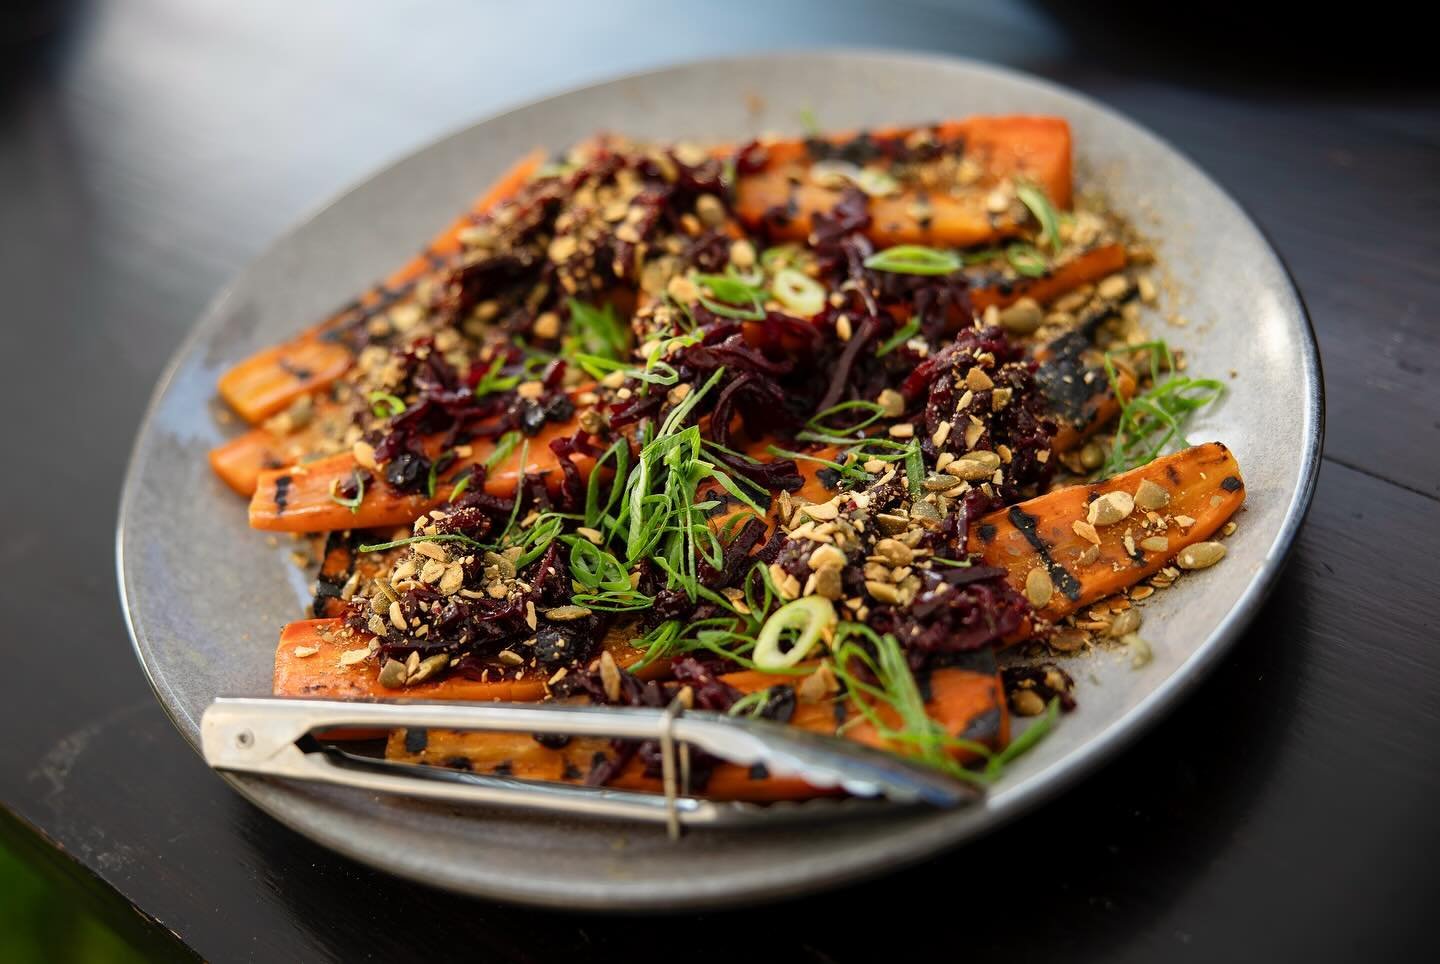 Our Banquet shared sides are the perfect accompaniment to your protein selection, you can mix and match to your heart&rsquo;s content. 

These delicious sides are: 
1)BBQ carrots, harissa, beetroot relish &amp; toasted hazelnuts
2)Roasted Broccoli, w